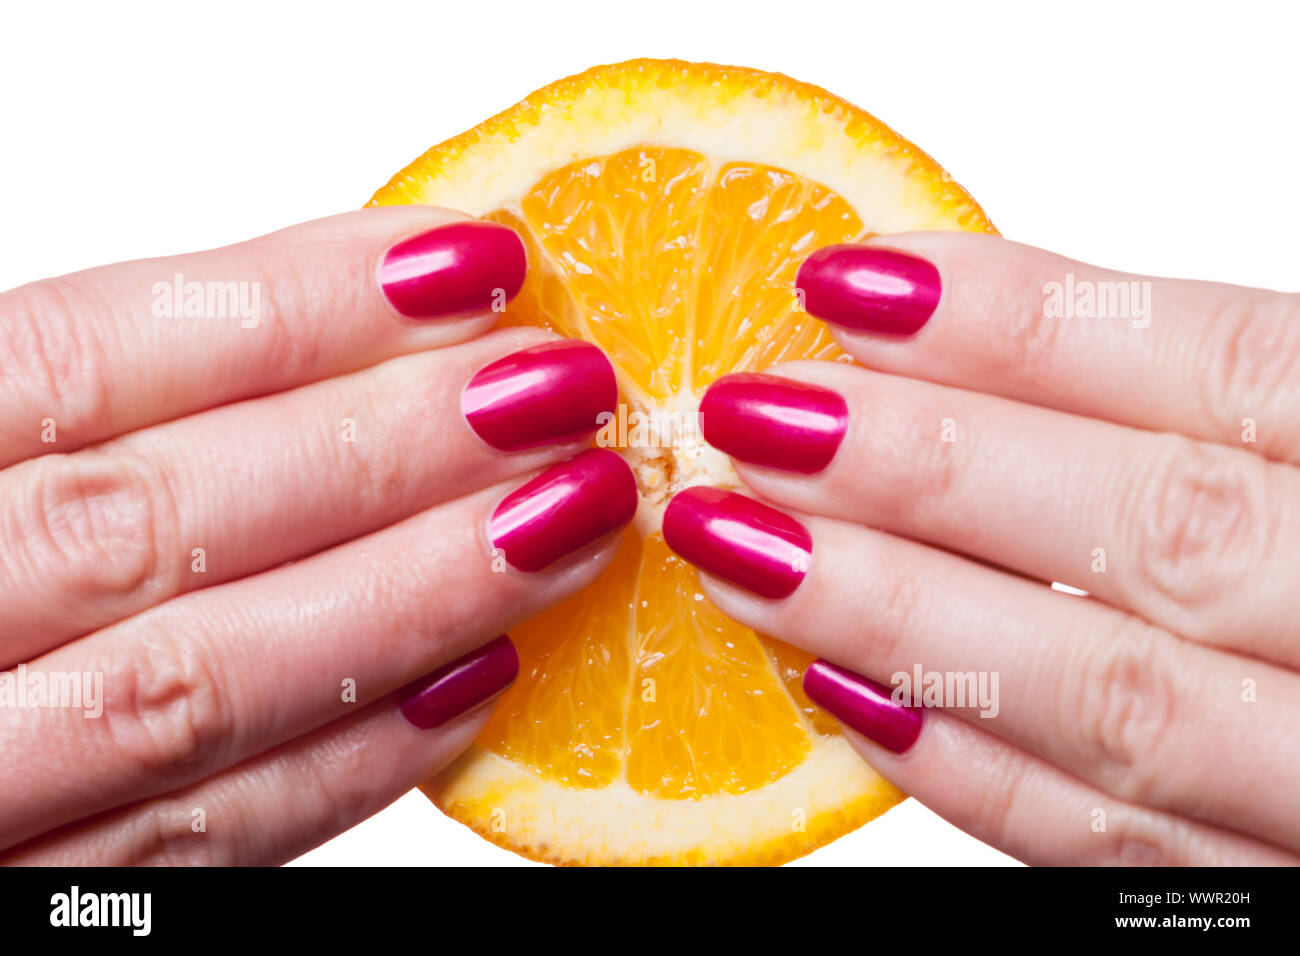 Hand with manicured nails touch an orange on white Stock Photo